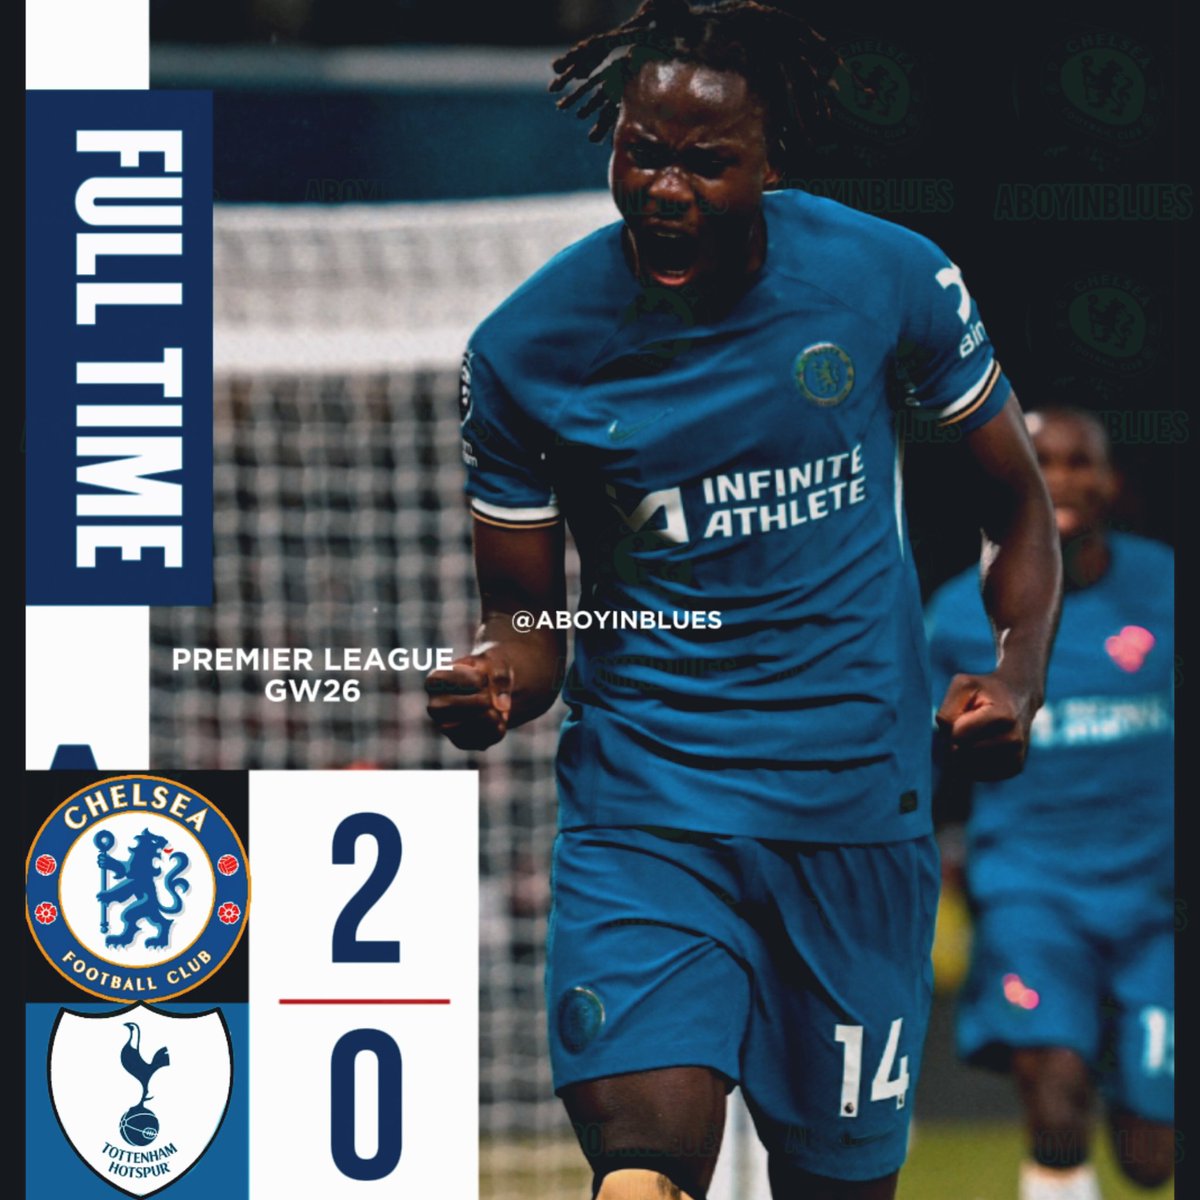 It doesn't matter how bad we are,
we remain a problem for Spurs.

#CFC #chelsea #chelseafc #cfc #cfcfamily #cfcindo #chelseafans #londonisblue #chelseaindonesia #football #beritabola #ktbffh #londonwillalwaysbeblue #blueschelsea #chelseaboots #chelseafootballclub #chetot #totche